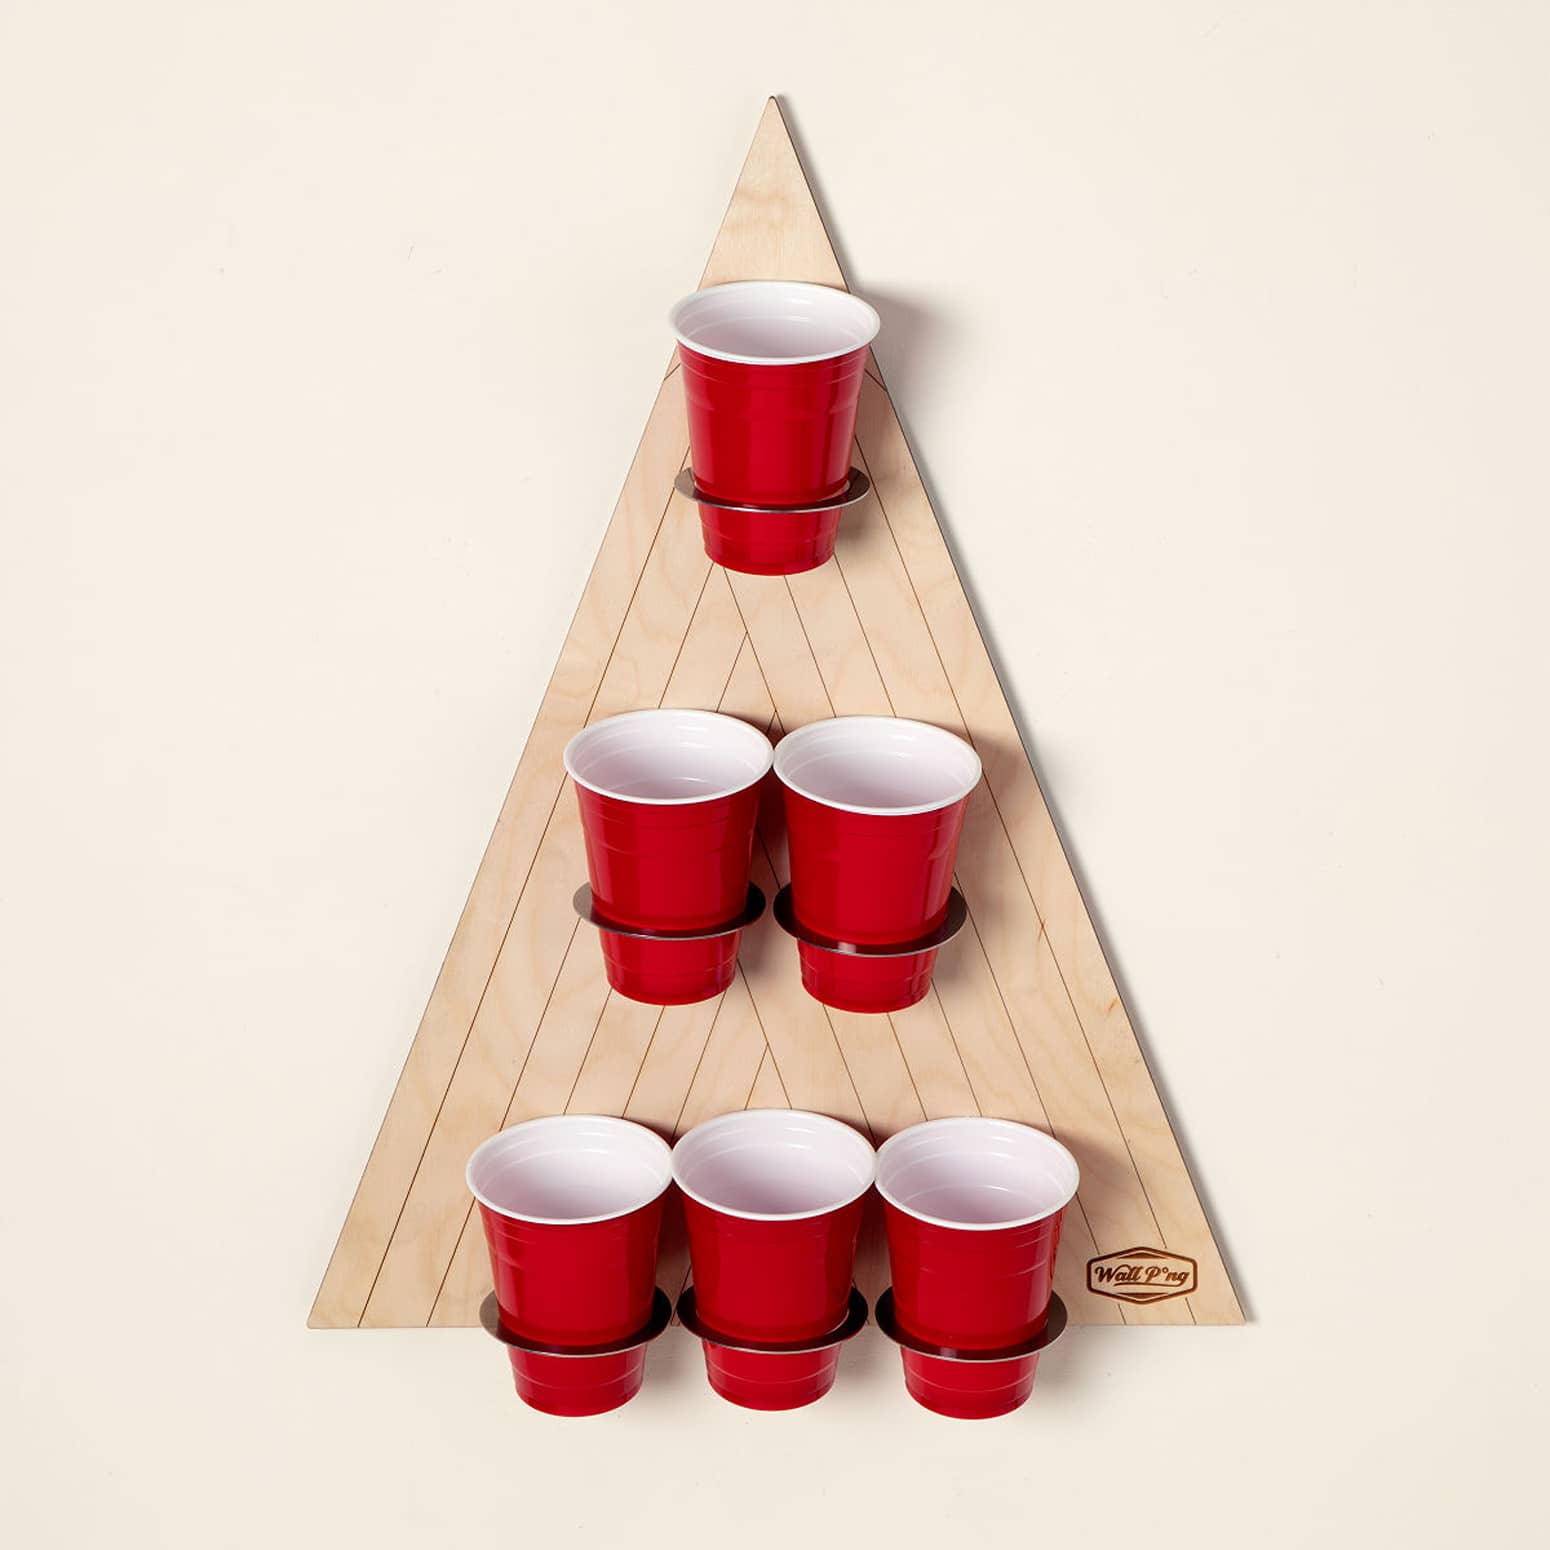 Wall Pong - Space-Saving Vertical Beer Pong Game